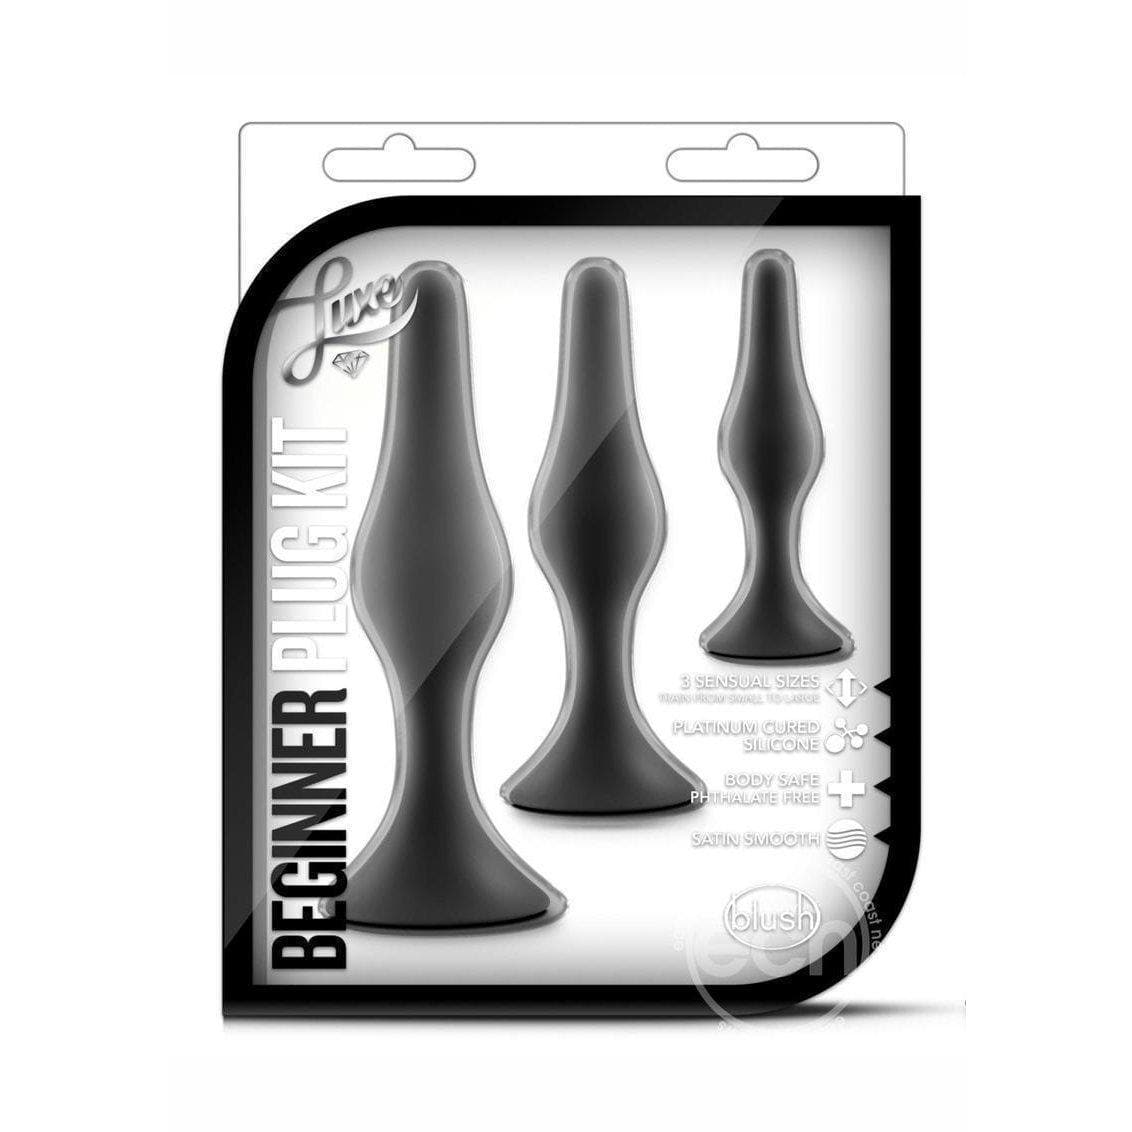 Luxe Beginner Silicone Couples Sex Toy Butt Plug Anal Trainer Kit with 3 Sizes pic